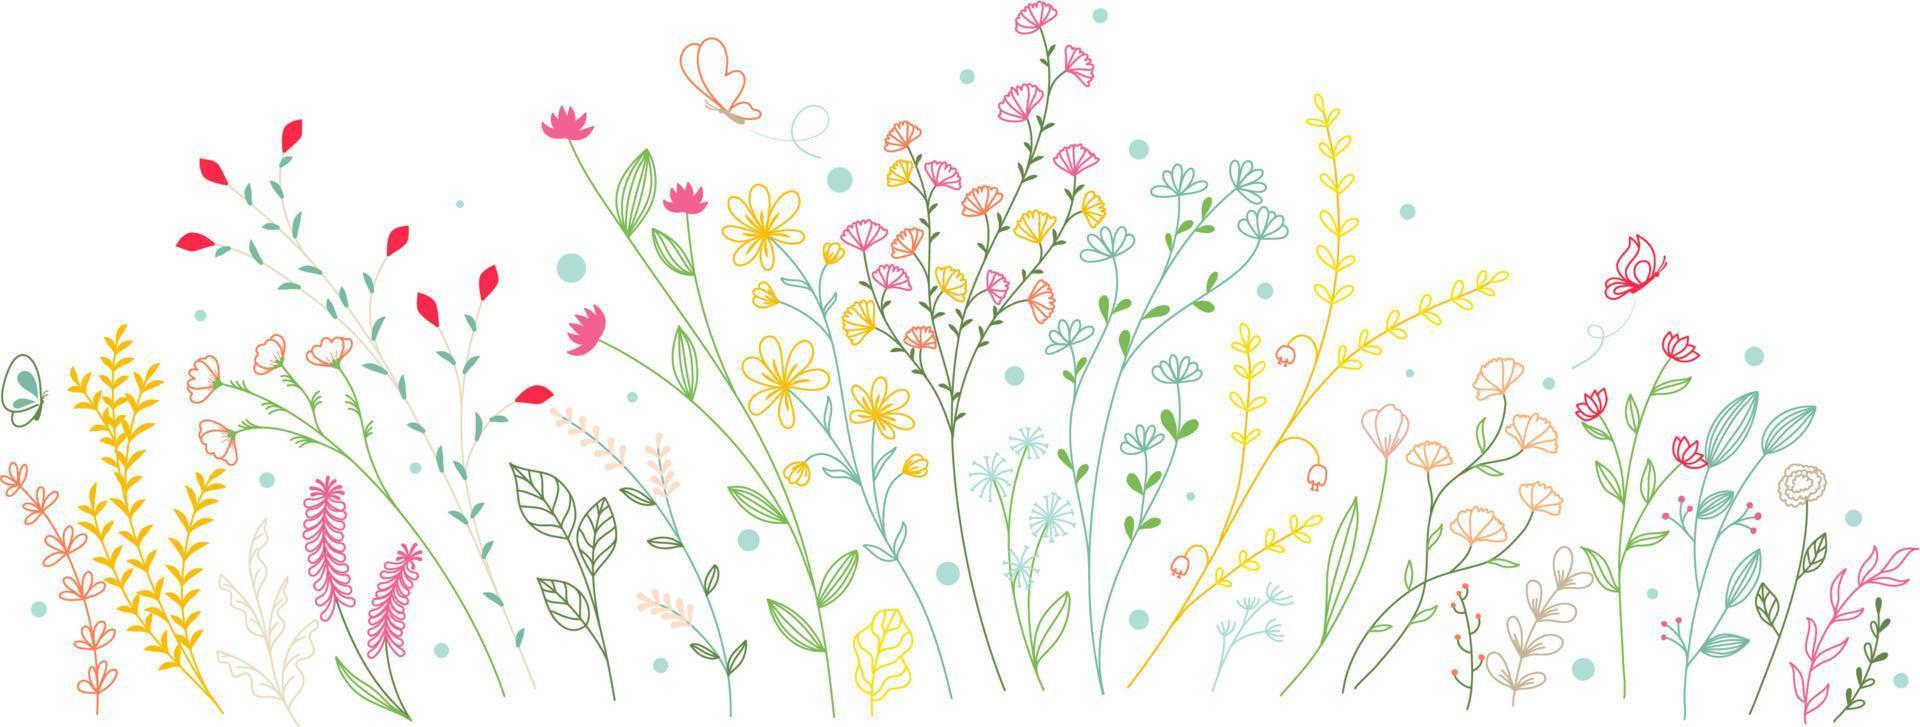 Flower doodle hand drawn vector